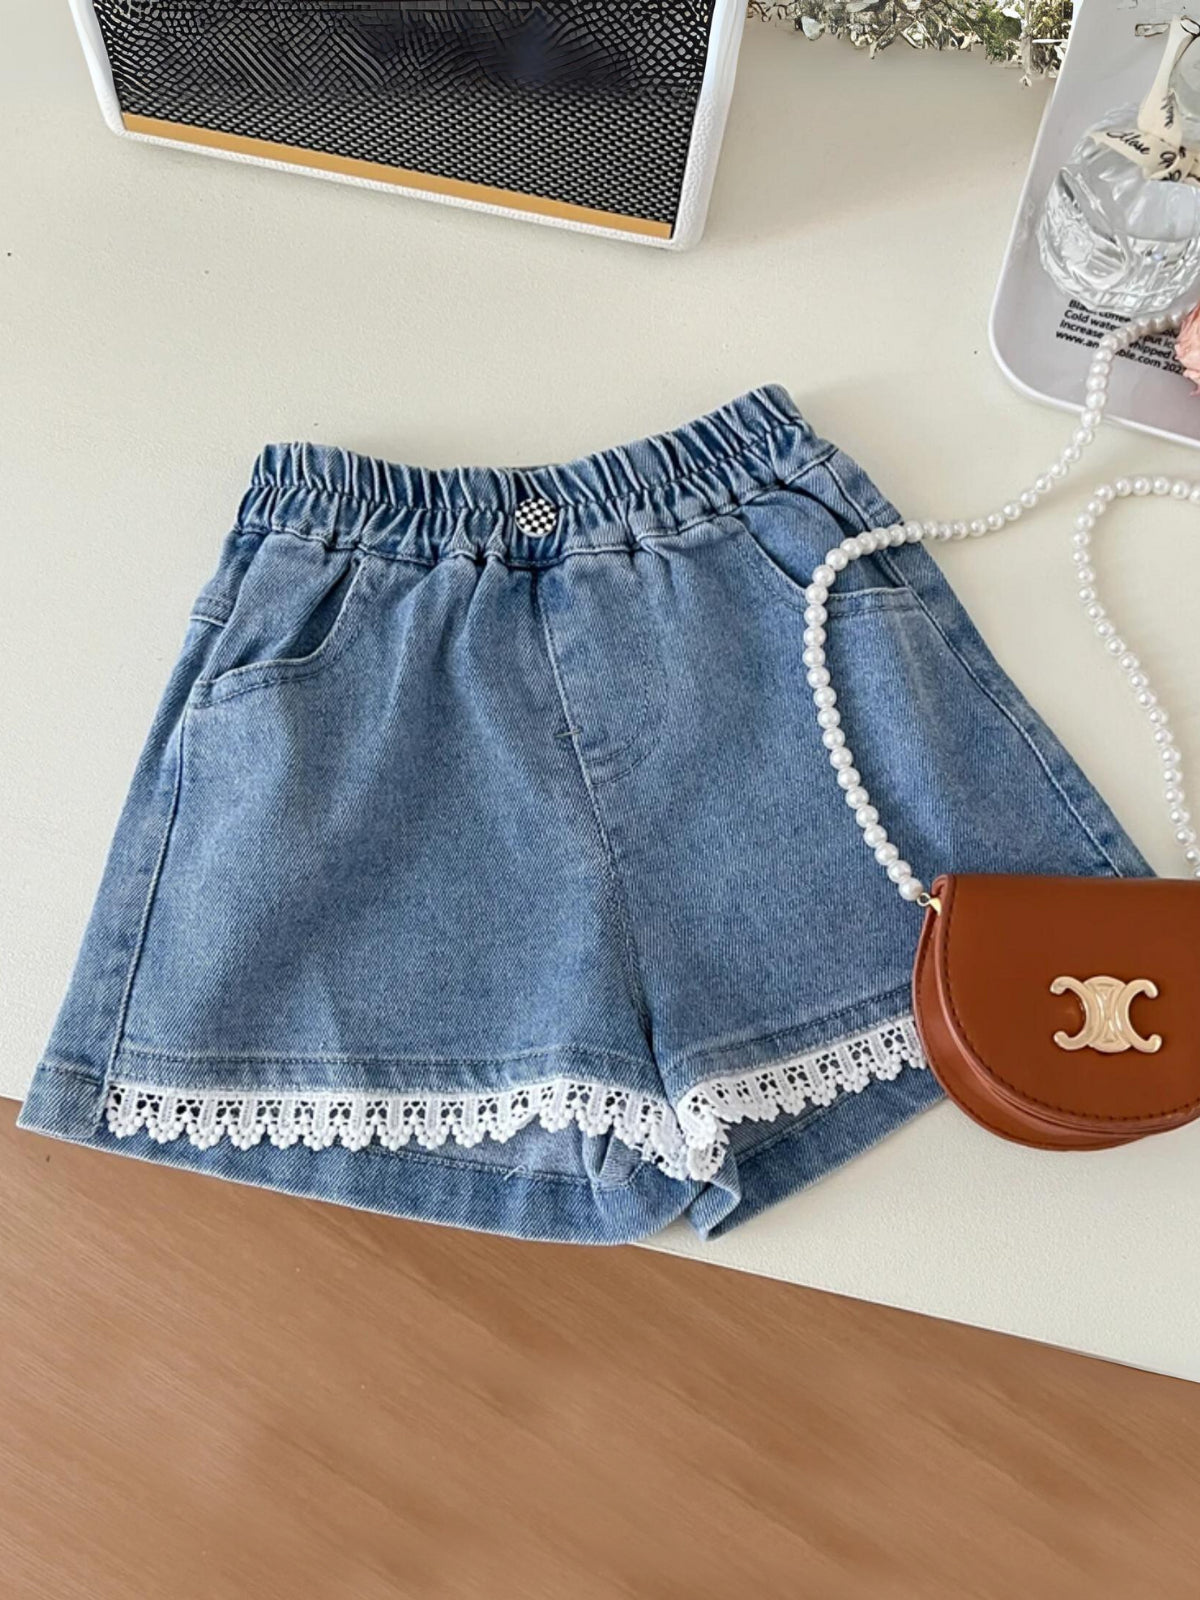 Mia Belle Girls White Top And Denim Short Set | Girls Spring Outfits